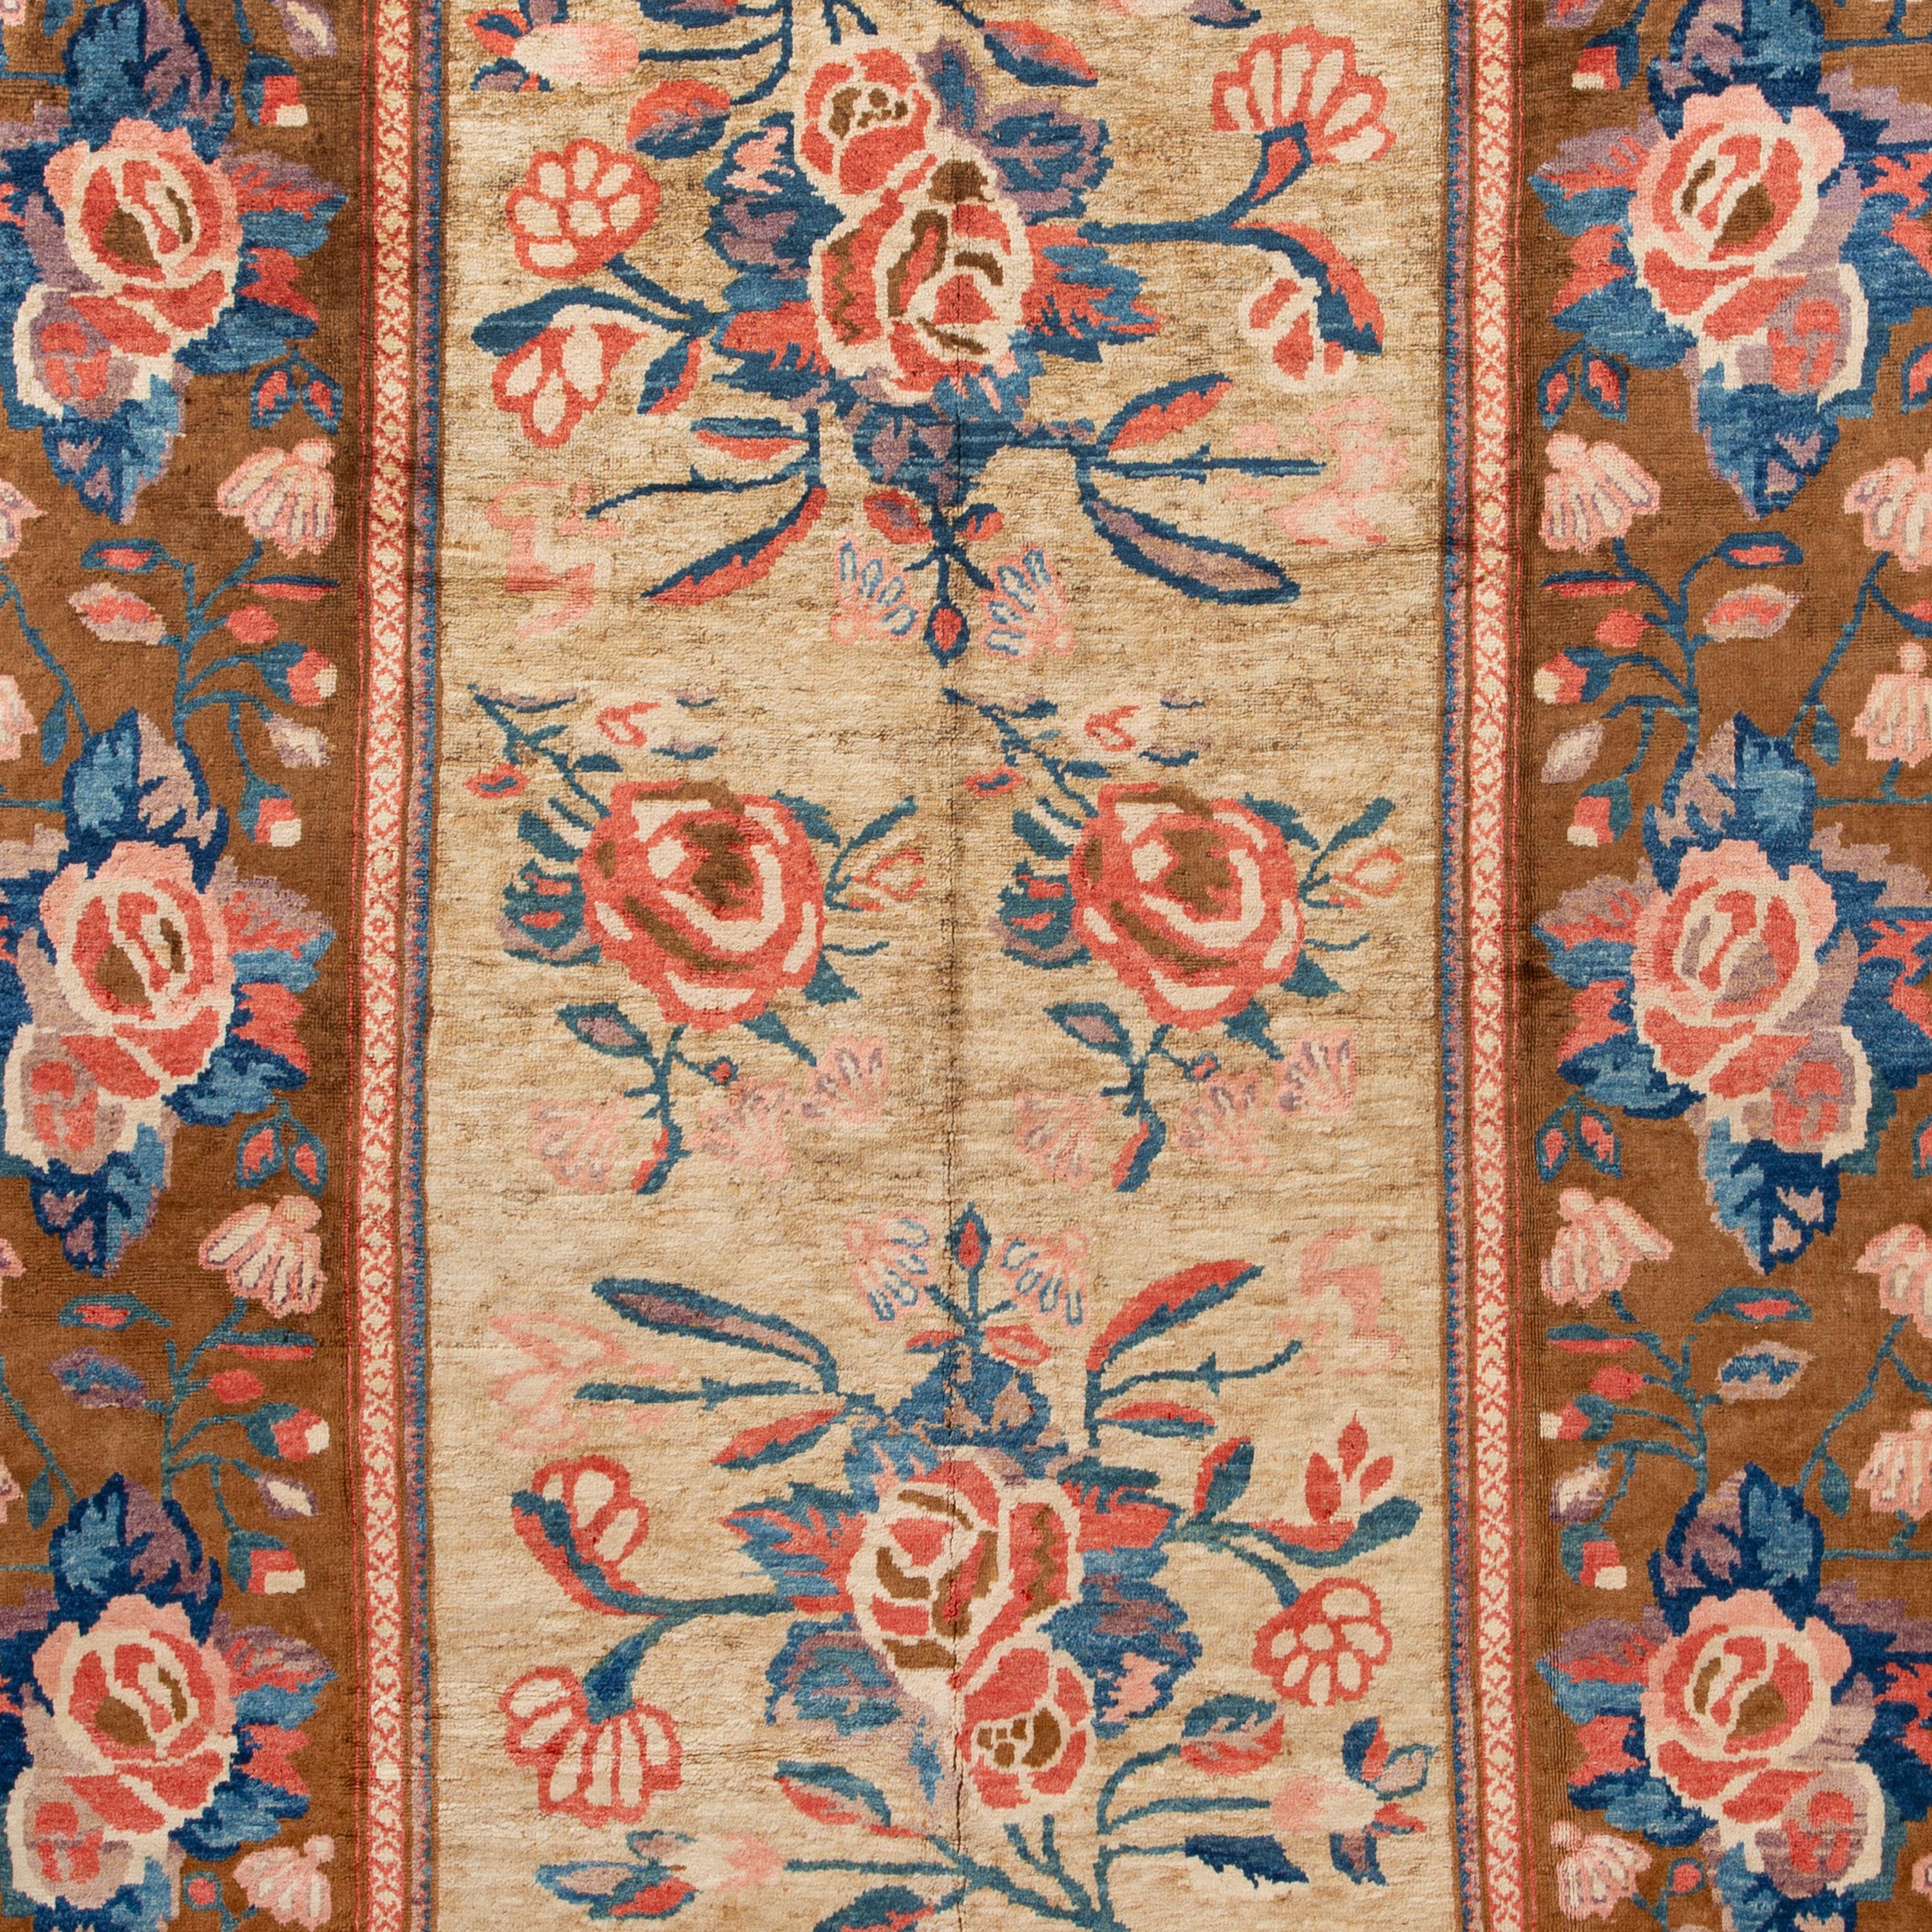 Large-scale floral motifs punctate a copper and ivory ground on this Karabaugh Traditional Rug - 8' x 11'9